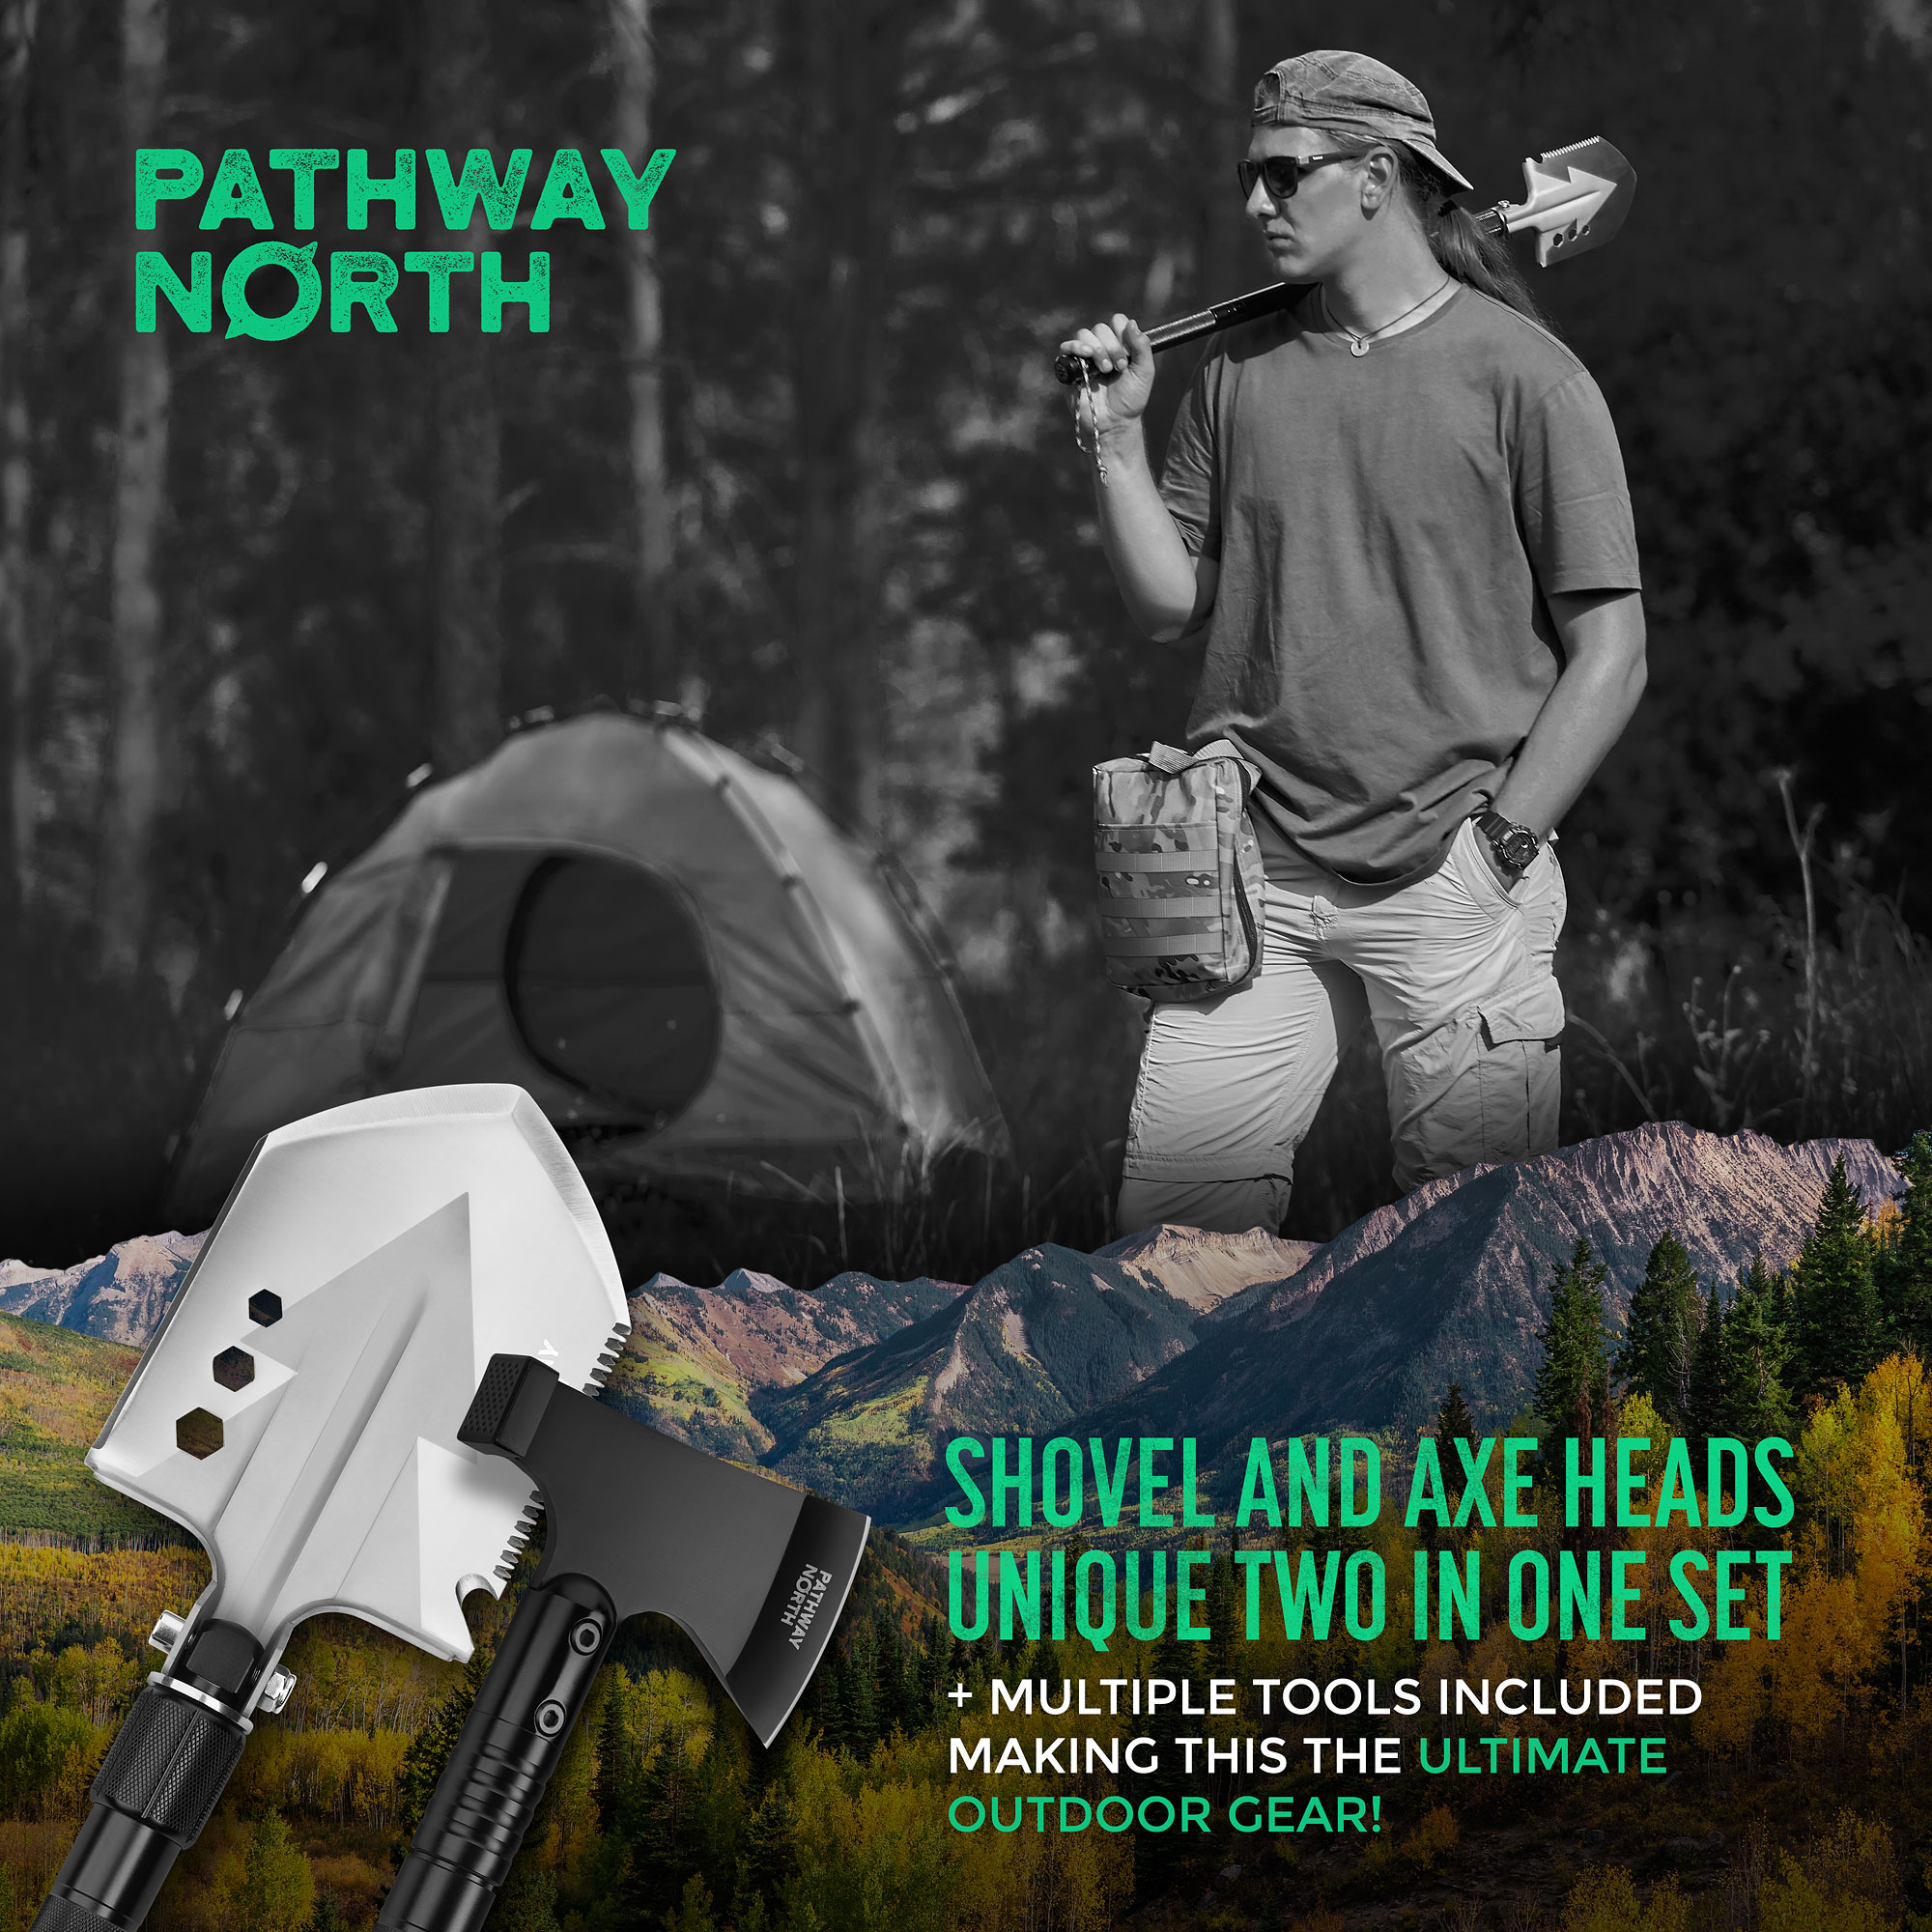 Pathway North Survival Shovel and Camping Axe – Stainless Steel Tactical, Survival Multi-Tool and Survival Hatchet Equipment for Outdoor Hiking Camping Gear, Hunting, Backpacking Emergency Kit - image 4 of 8